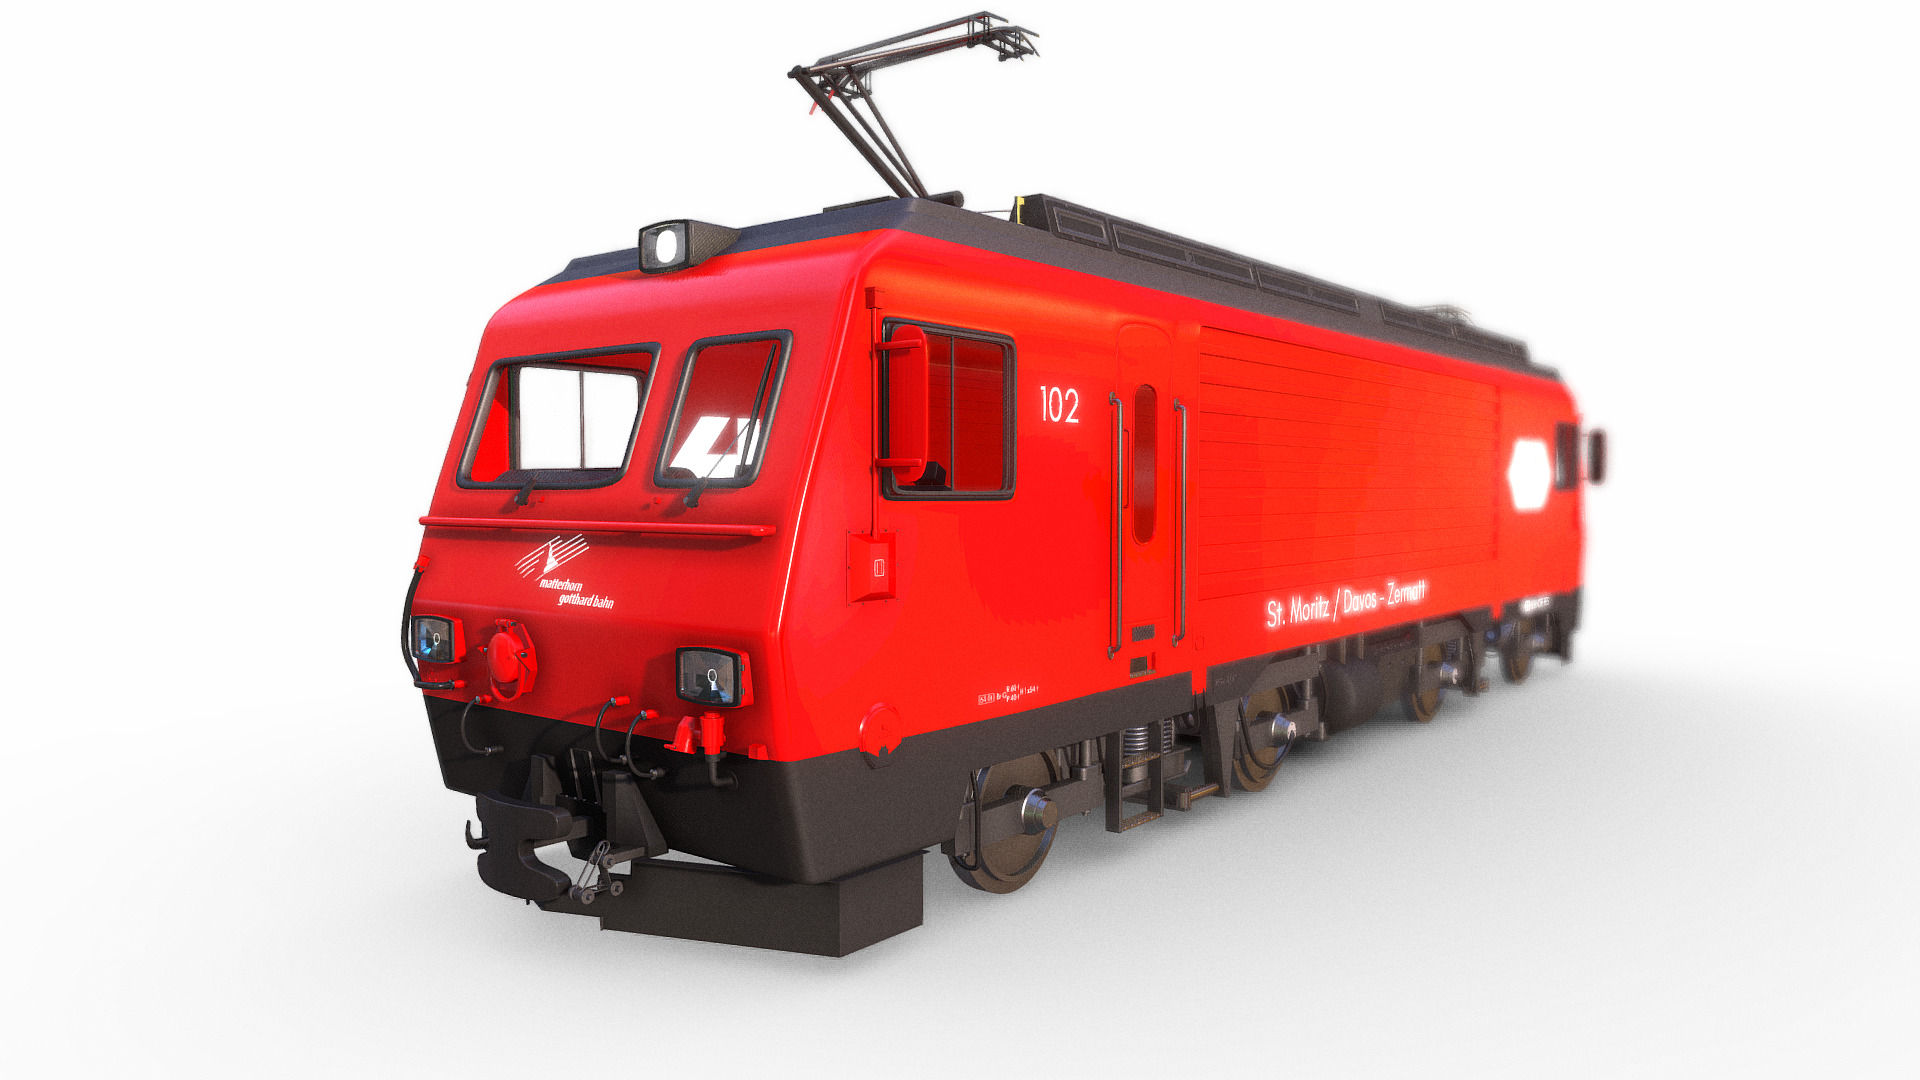 3D model Loco - This is a 3D model of the Loco. The 3D model is about a red train car.